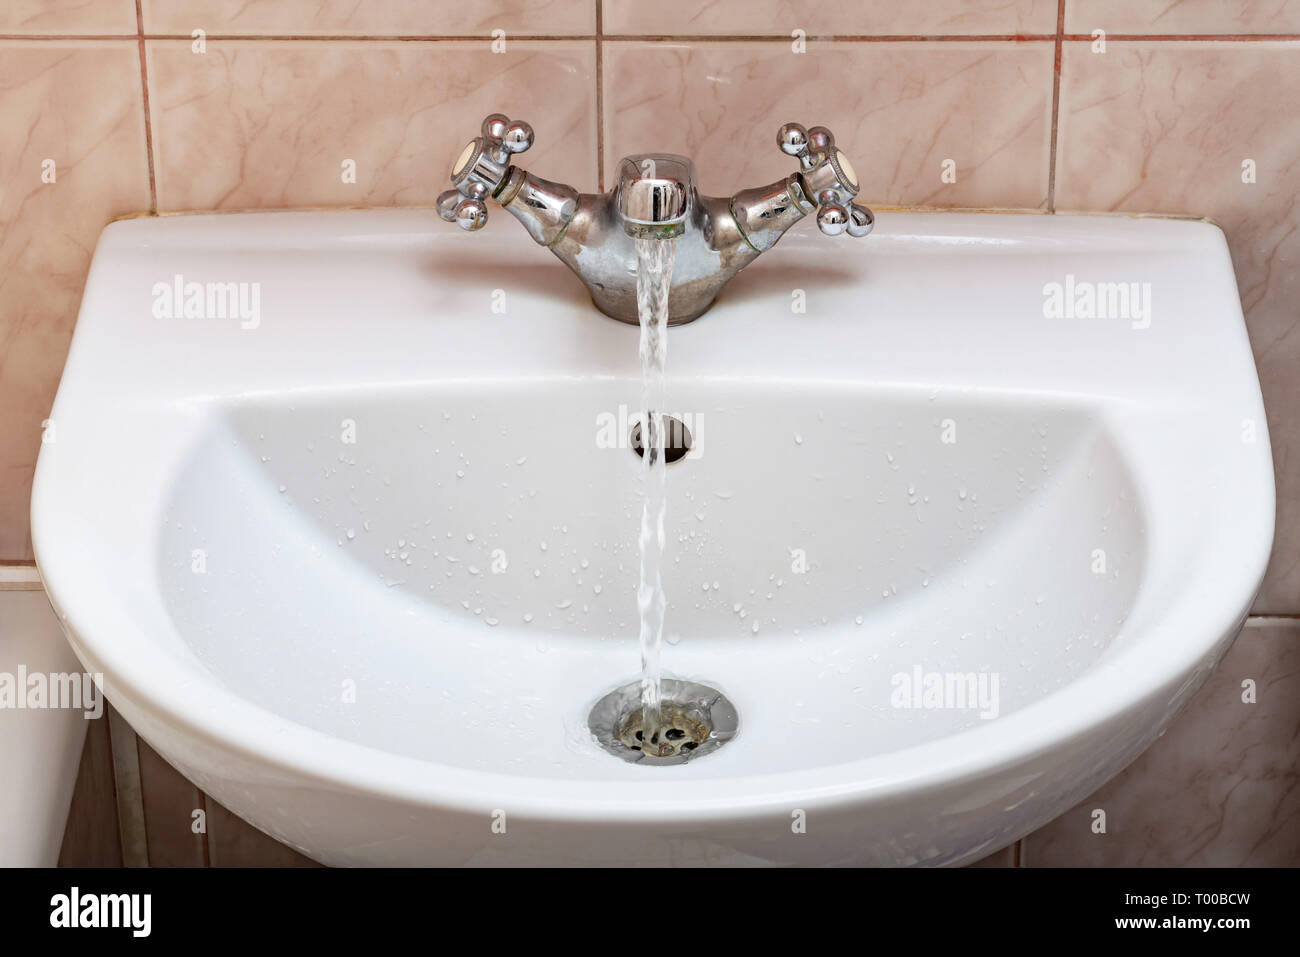 Horizontal image of a tap with water flowing strongly under high pressure Stock Photo